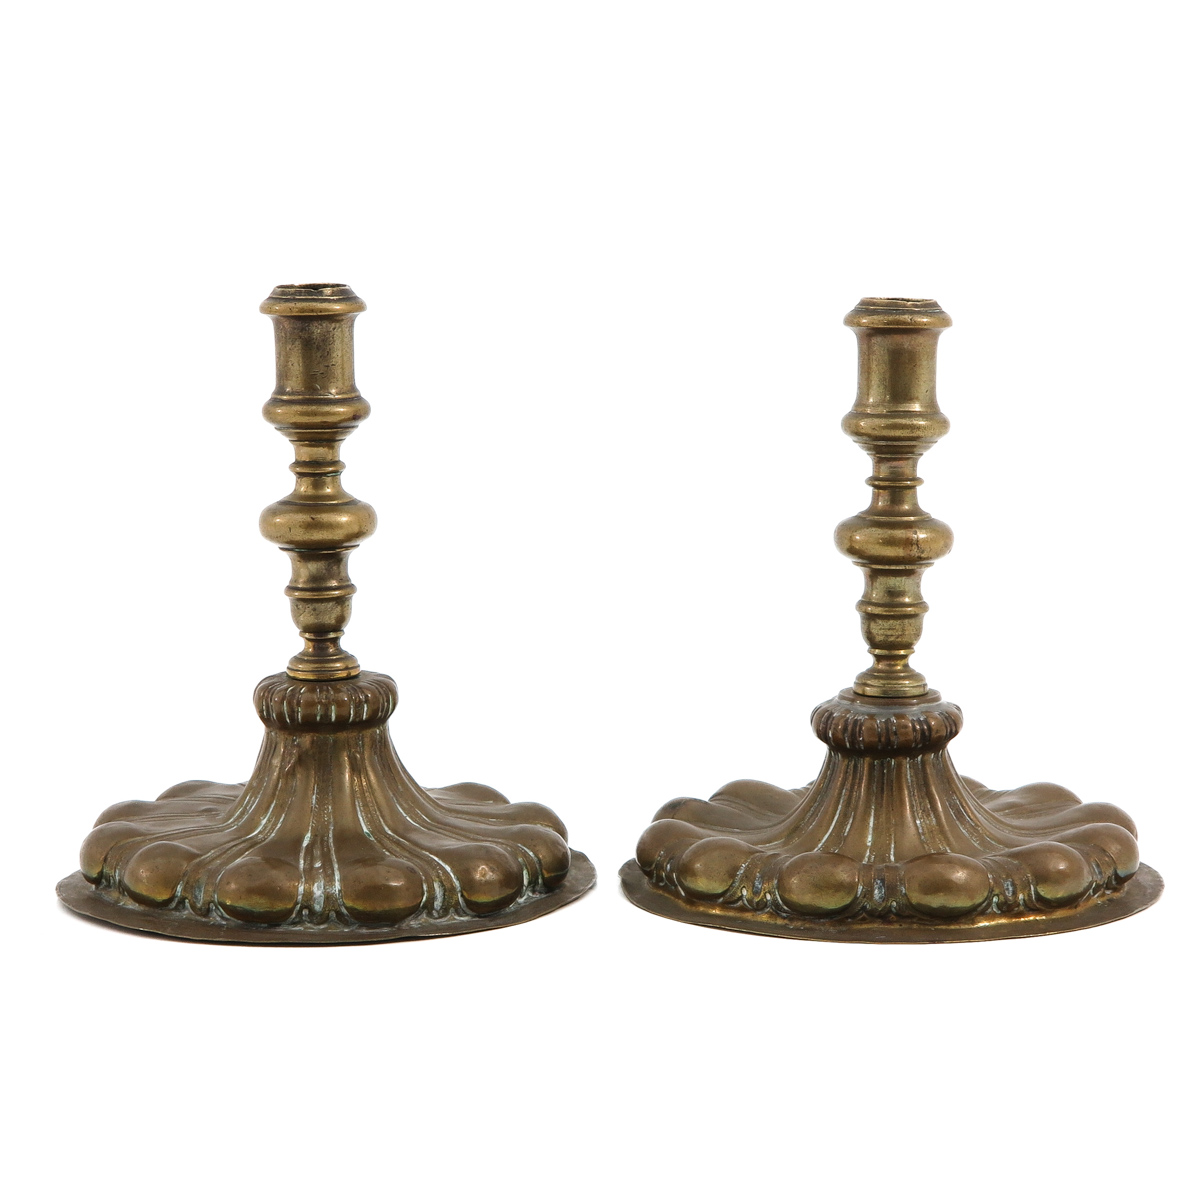 A Pair of 17th Century Italian Candlesticks - Image 3 of 8